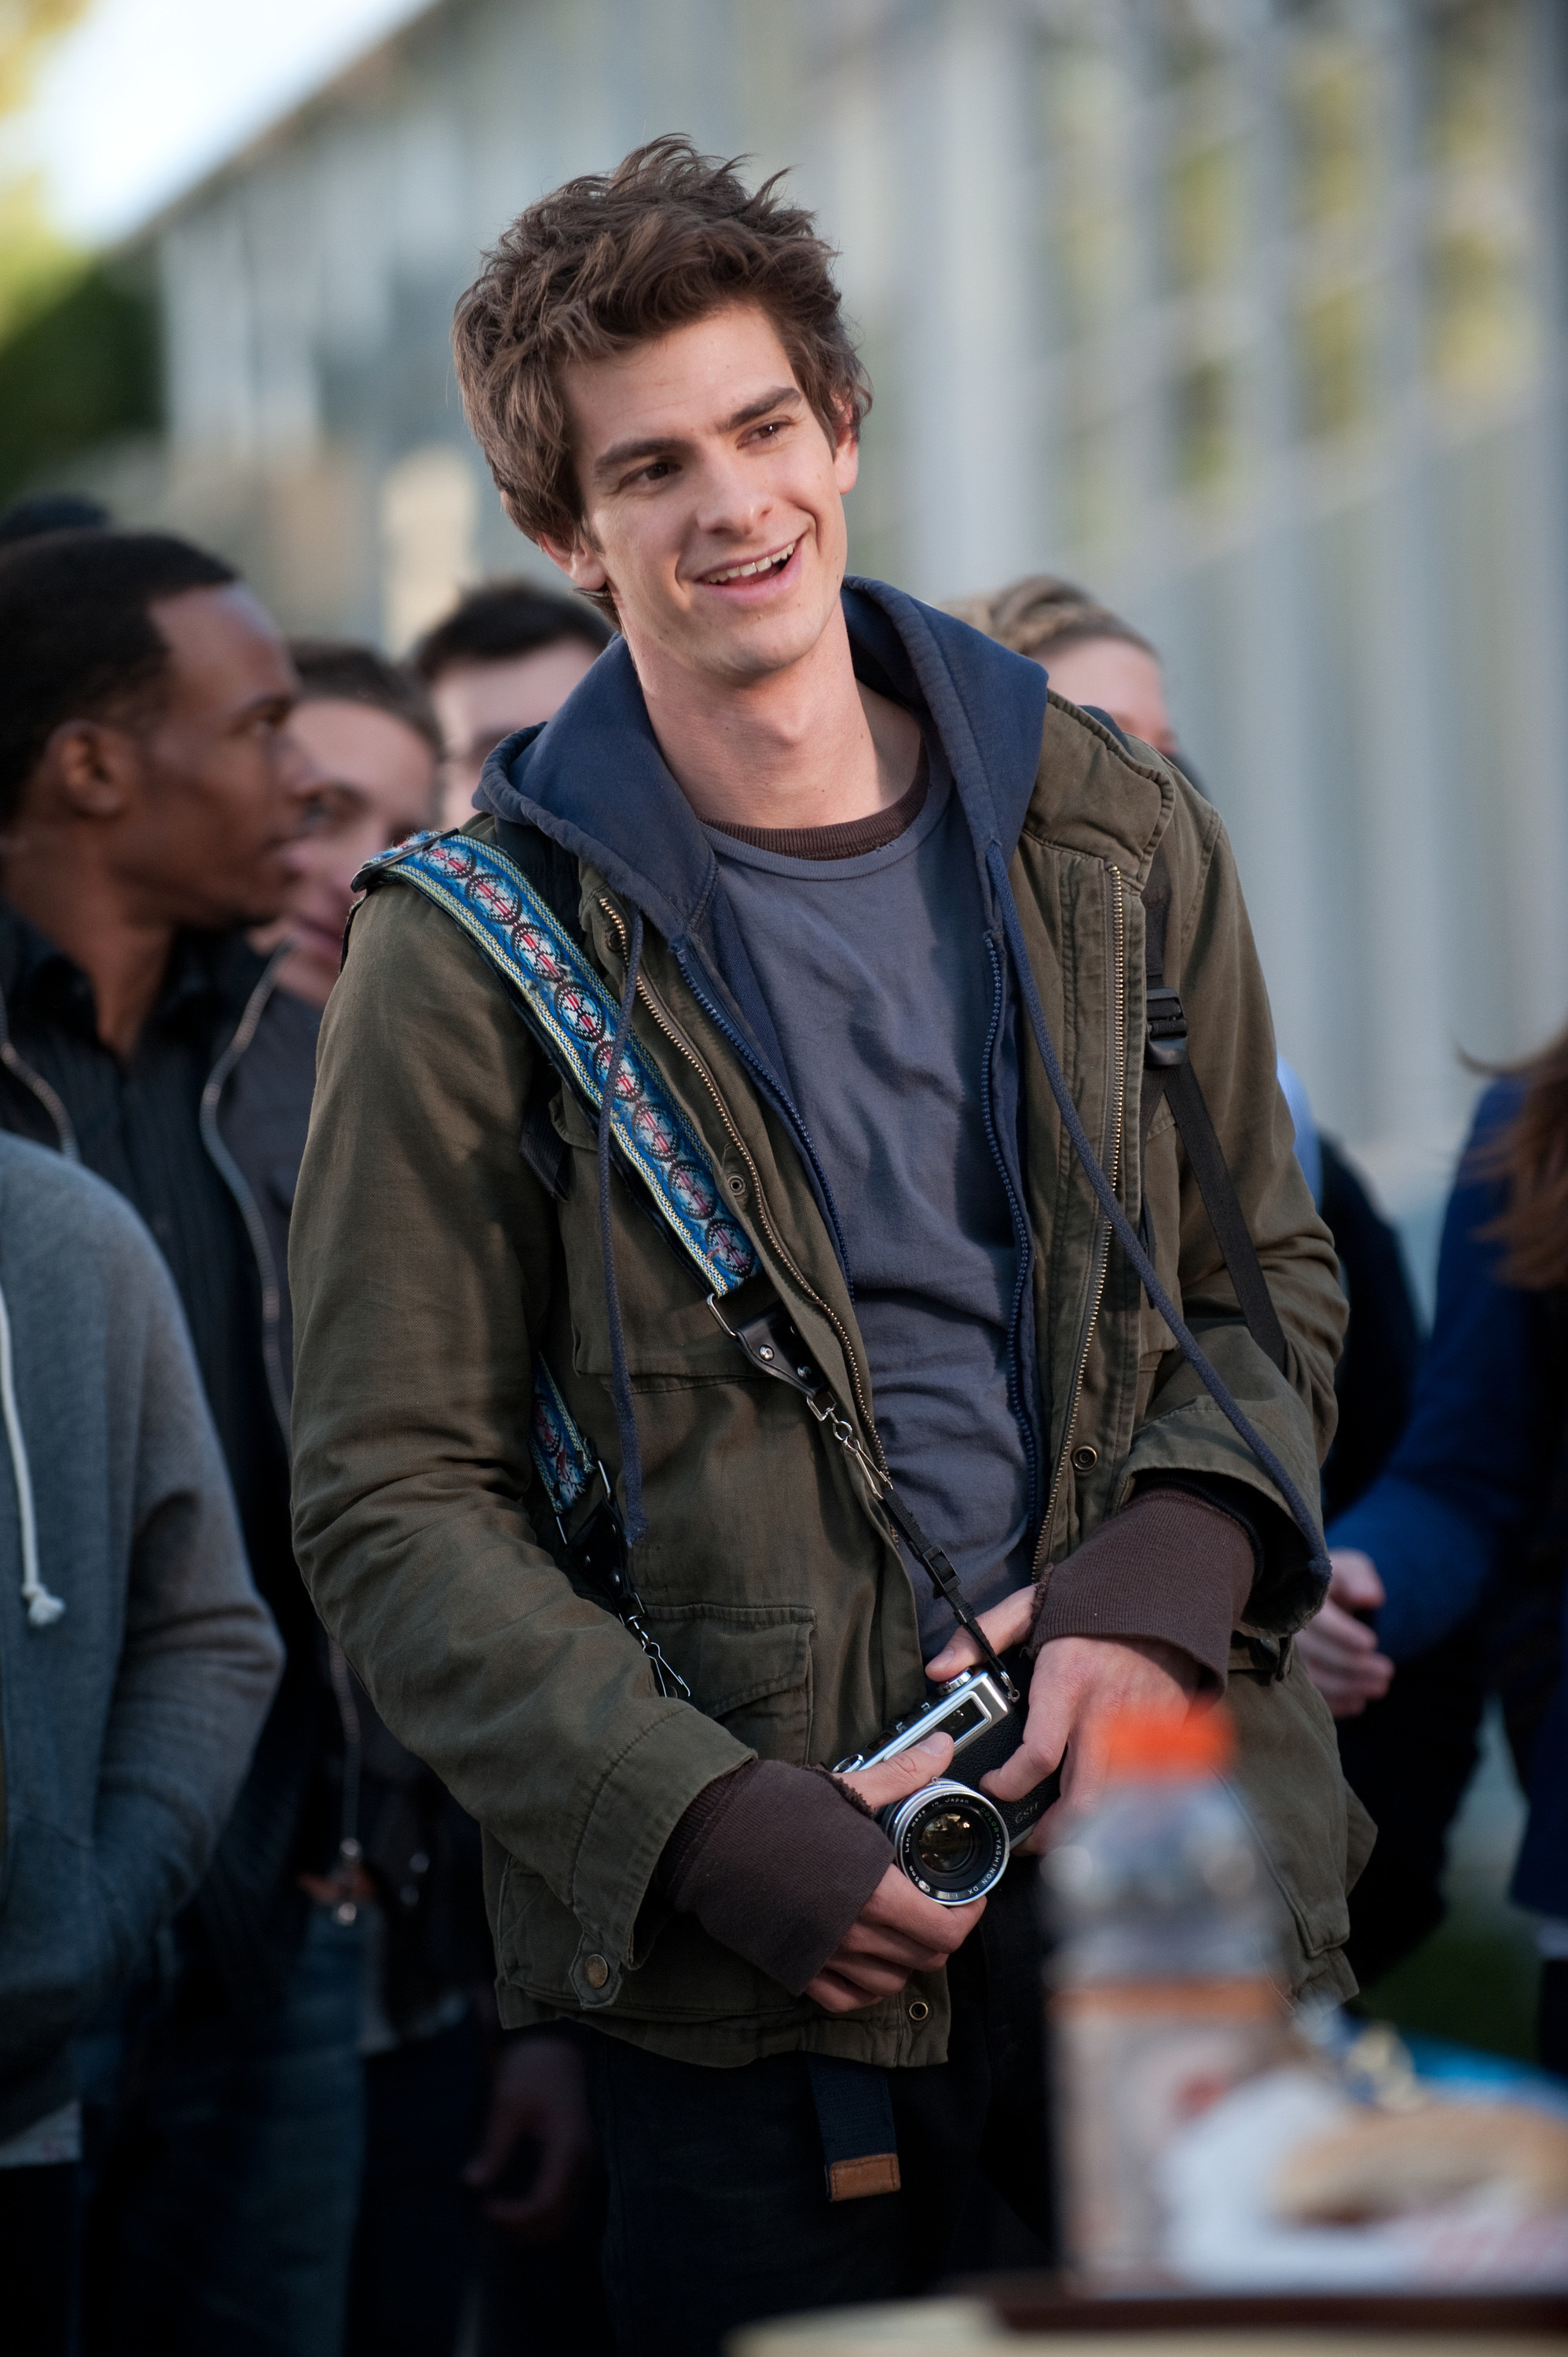 Andrew as Peter Parker